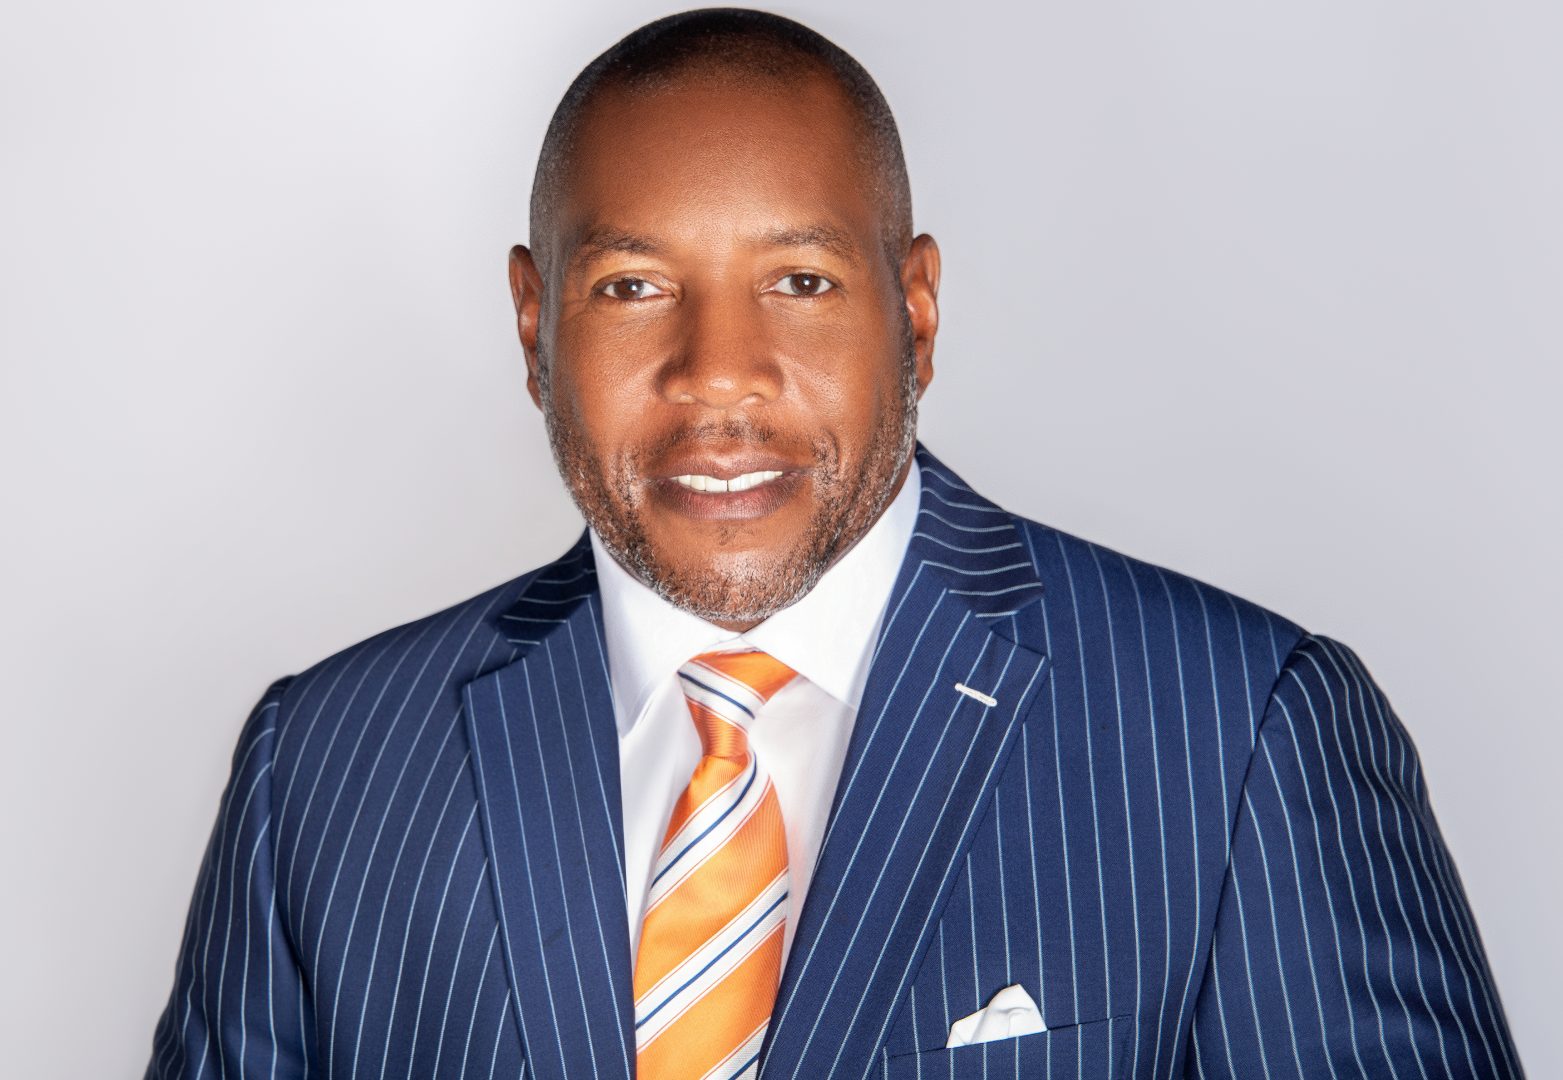 Black Wealth Summit CEO Cedric Nash wants you to take control of your finances